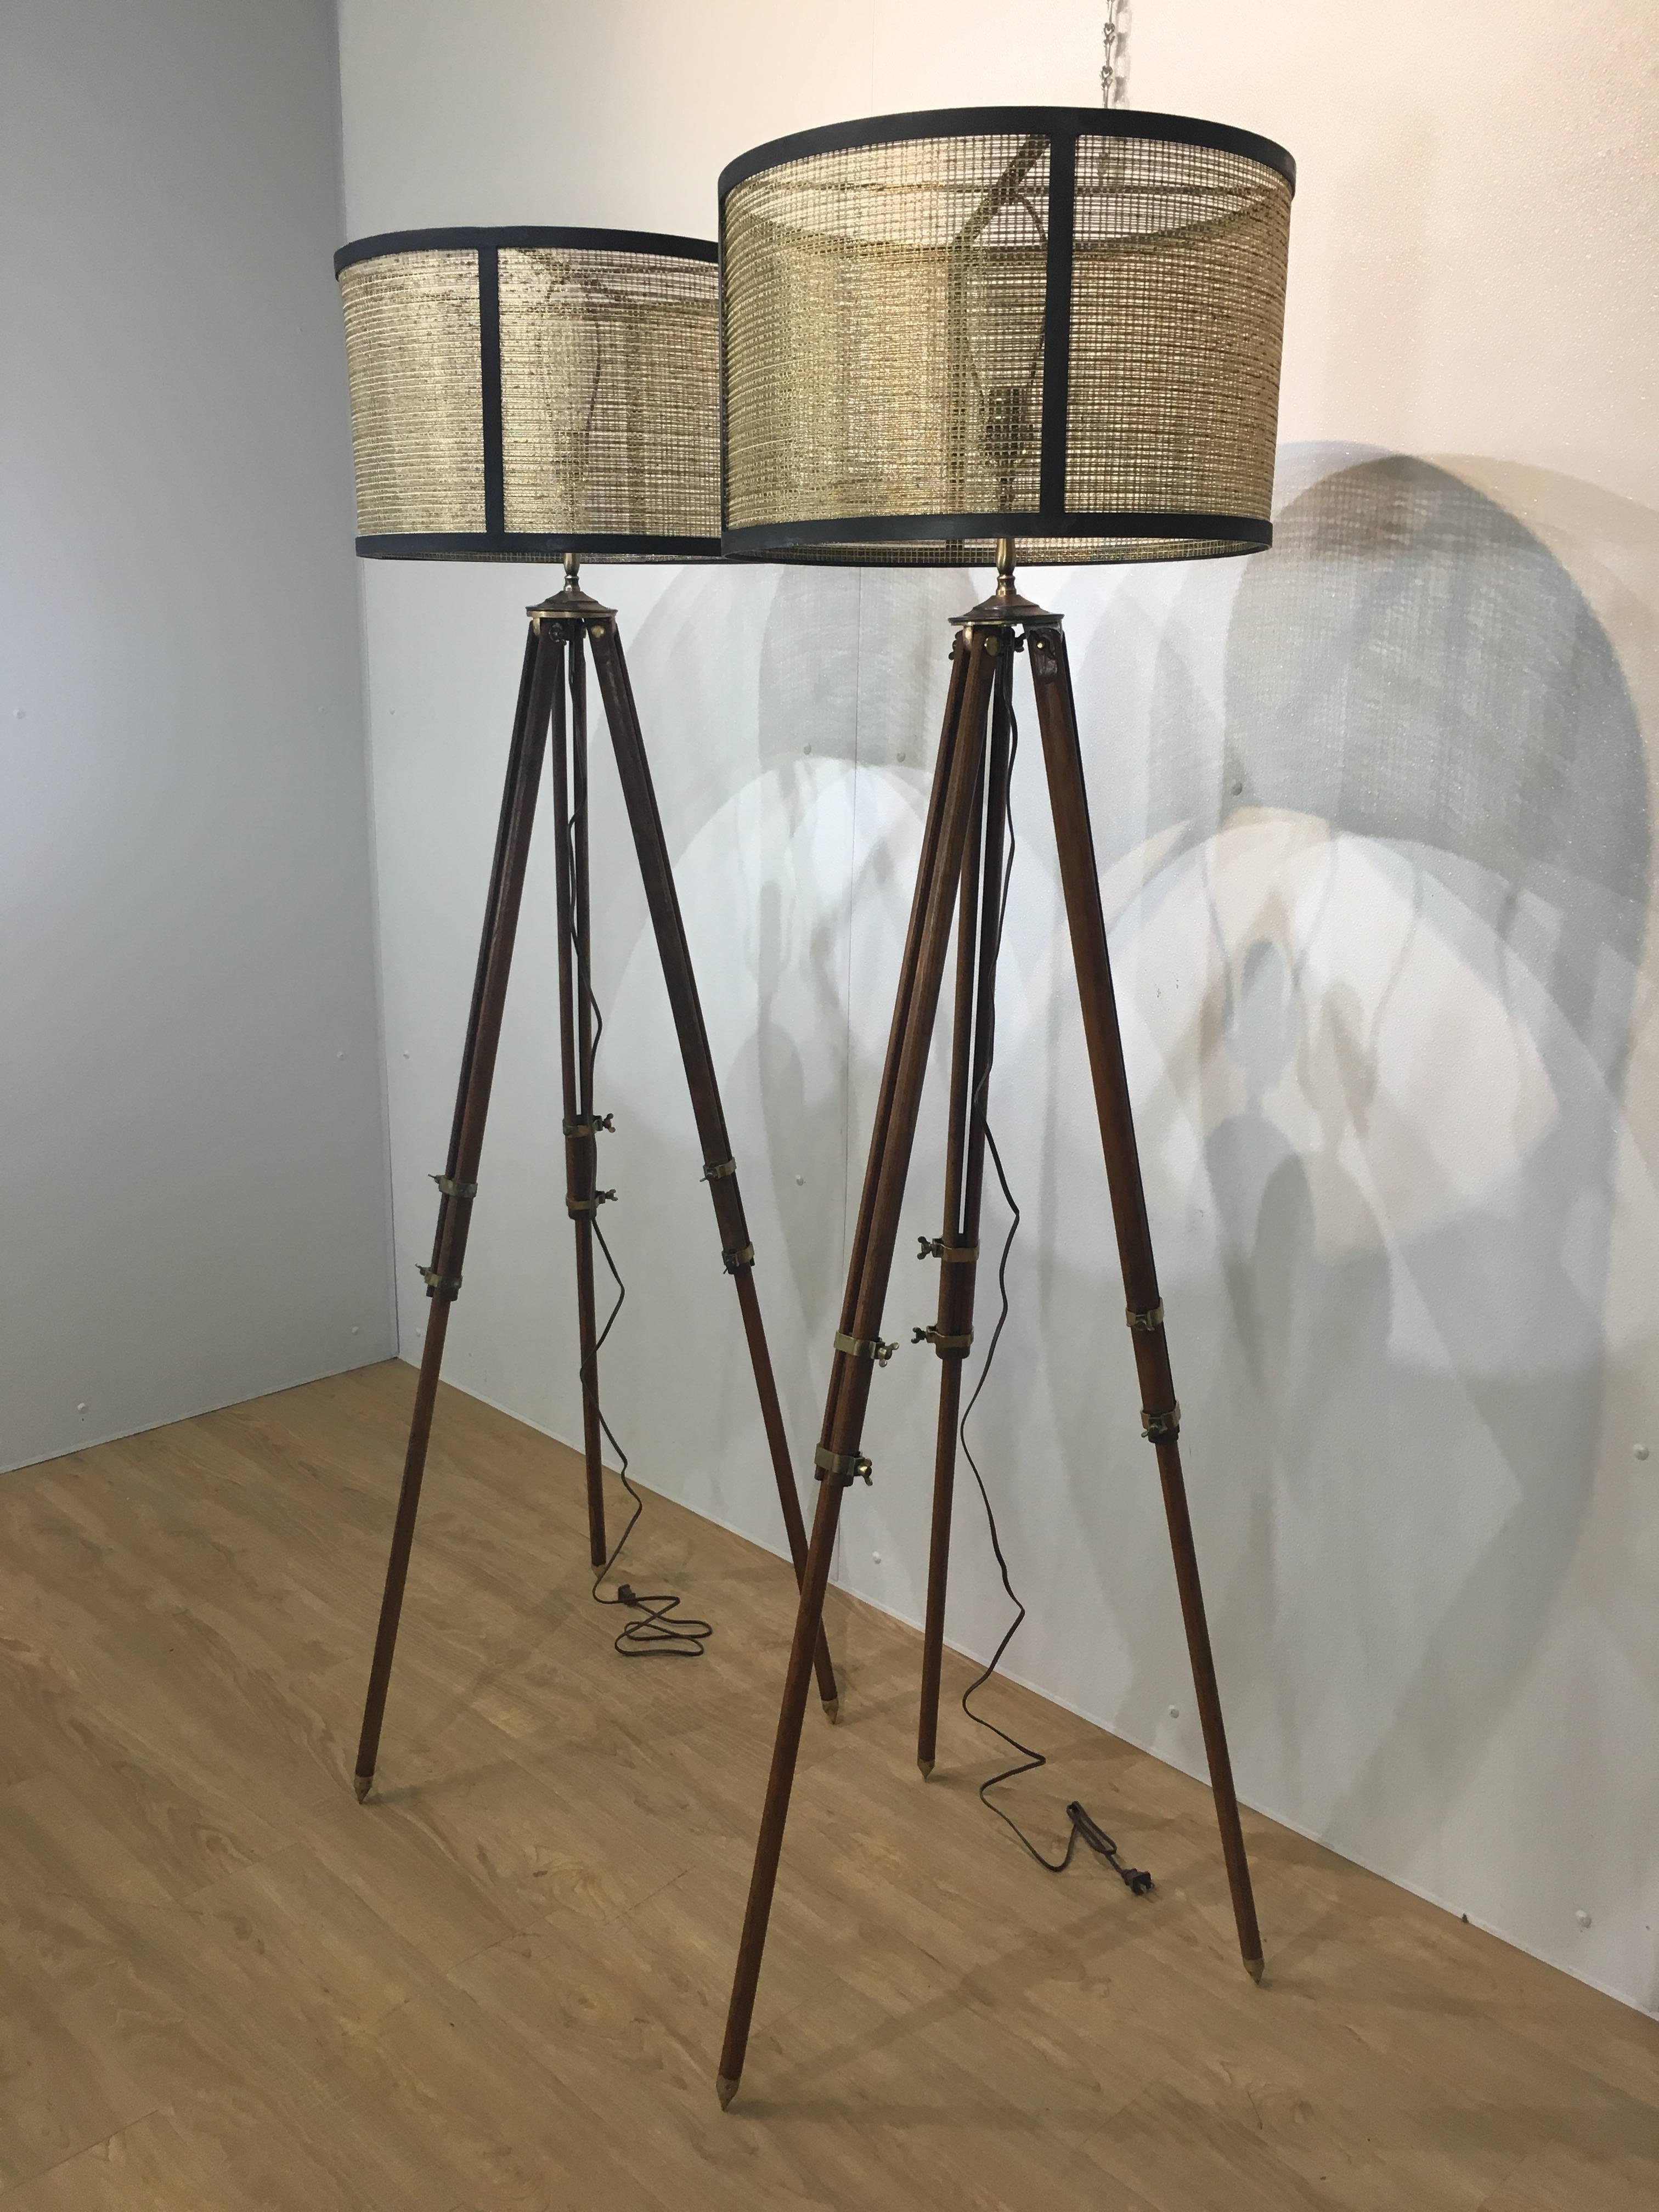 Pair of antique Surveyor floor lamps, each one of wood and brass mounts, adjustable fittings. With custom gilt mesh and patinated metal drum shades.
Shade measures 19.25" W x 12" H.
Adjustable height between 40" and 64"